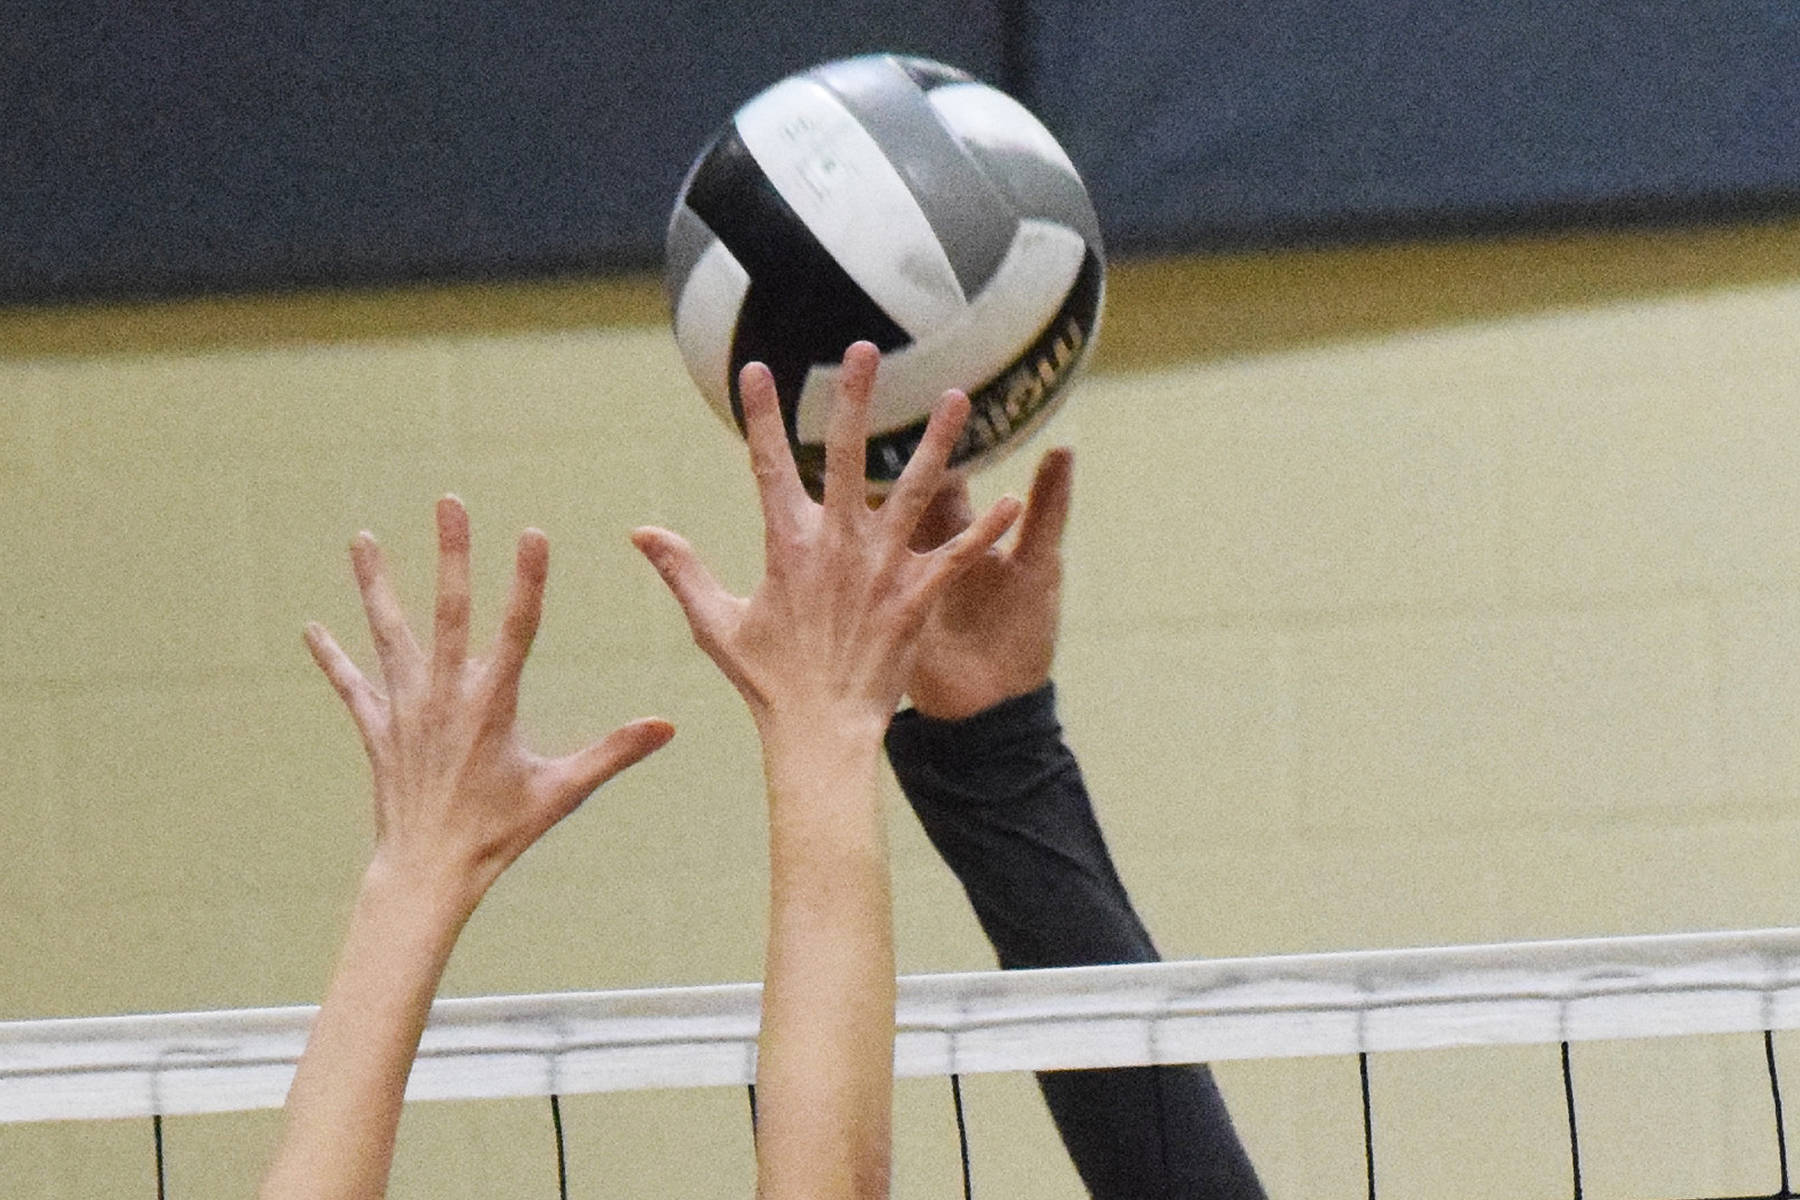 Nikolaevsk wins 1st day at Mix Six state volleyball